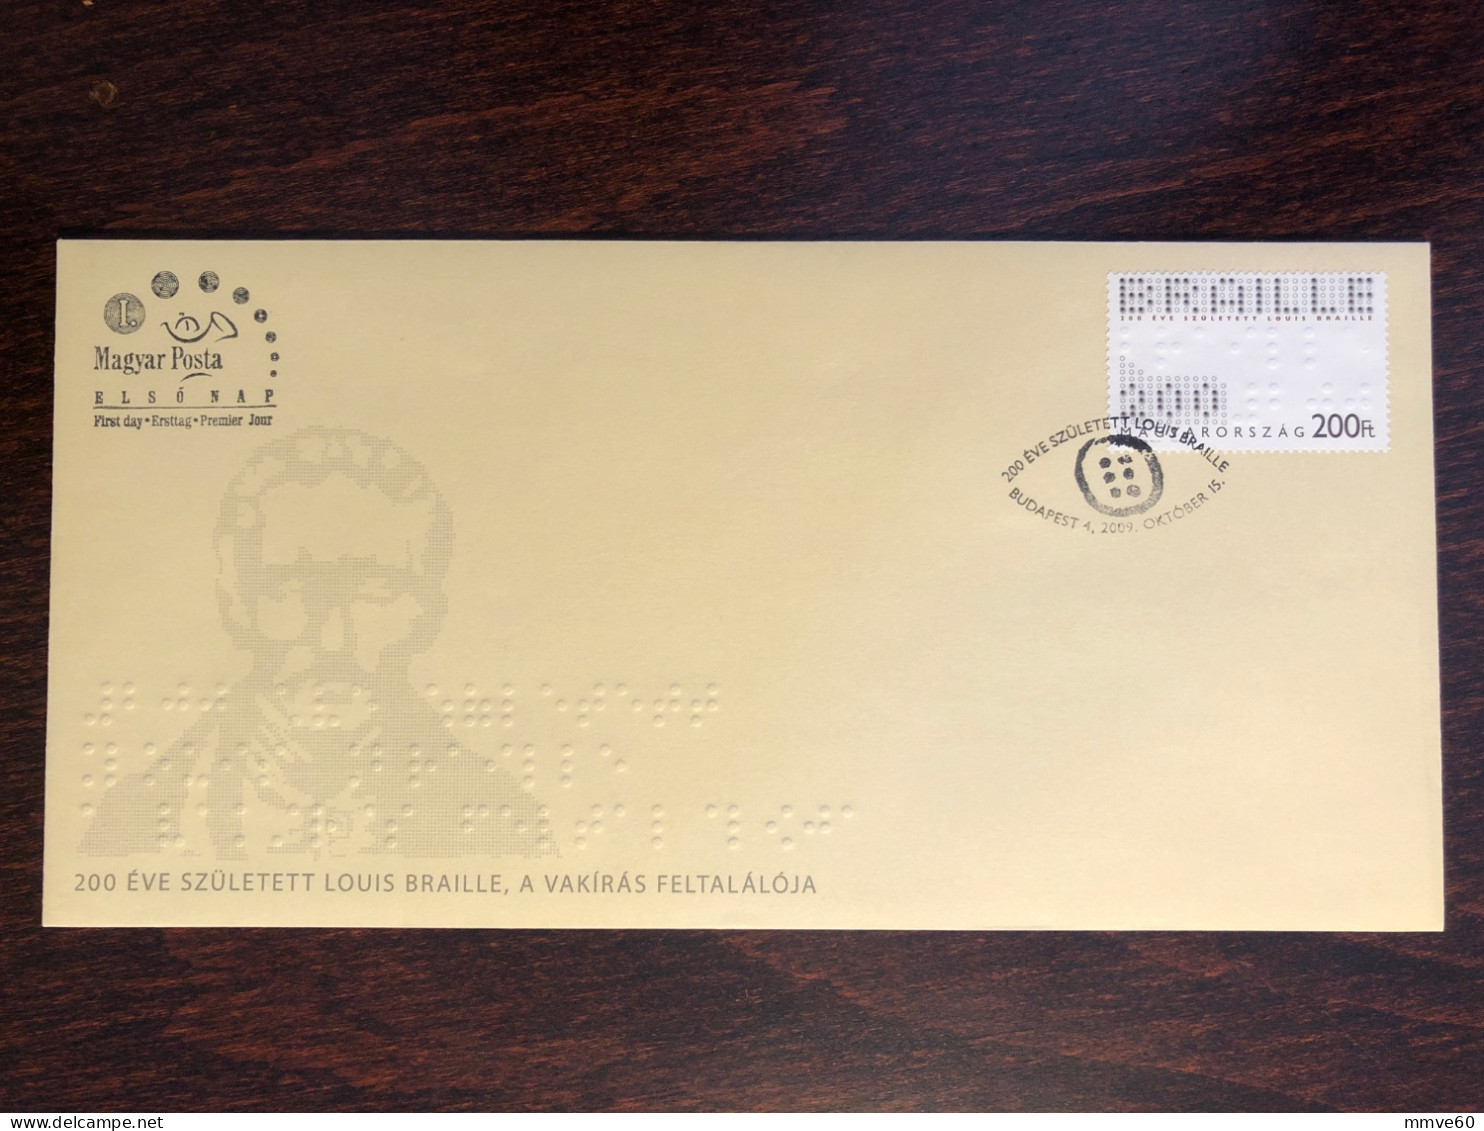 HUNGARY FDC COVER 2009 YEAR BRAILLE BLINDNESS BLIND HEALTH MEDICINE STAMPS - FDC